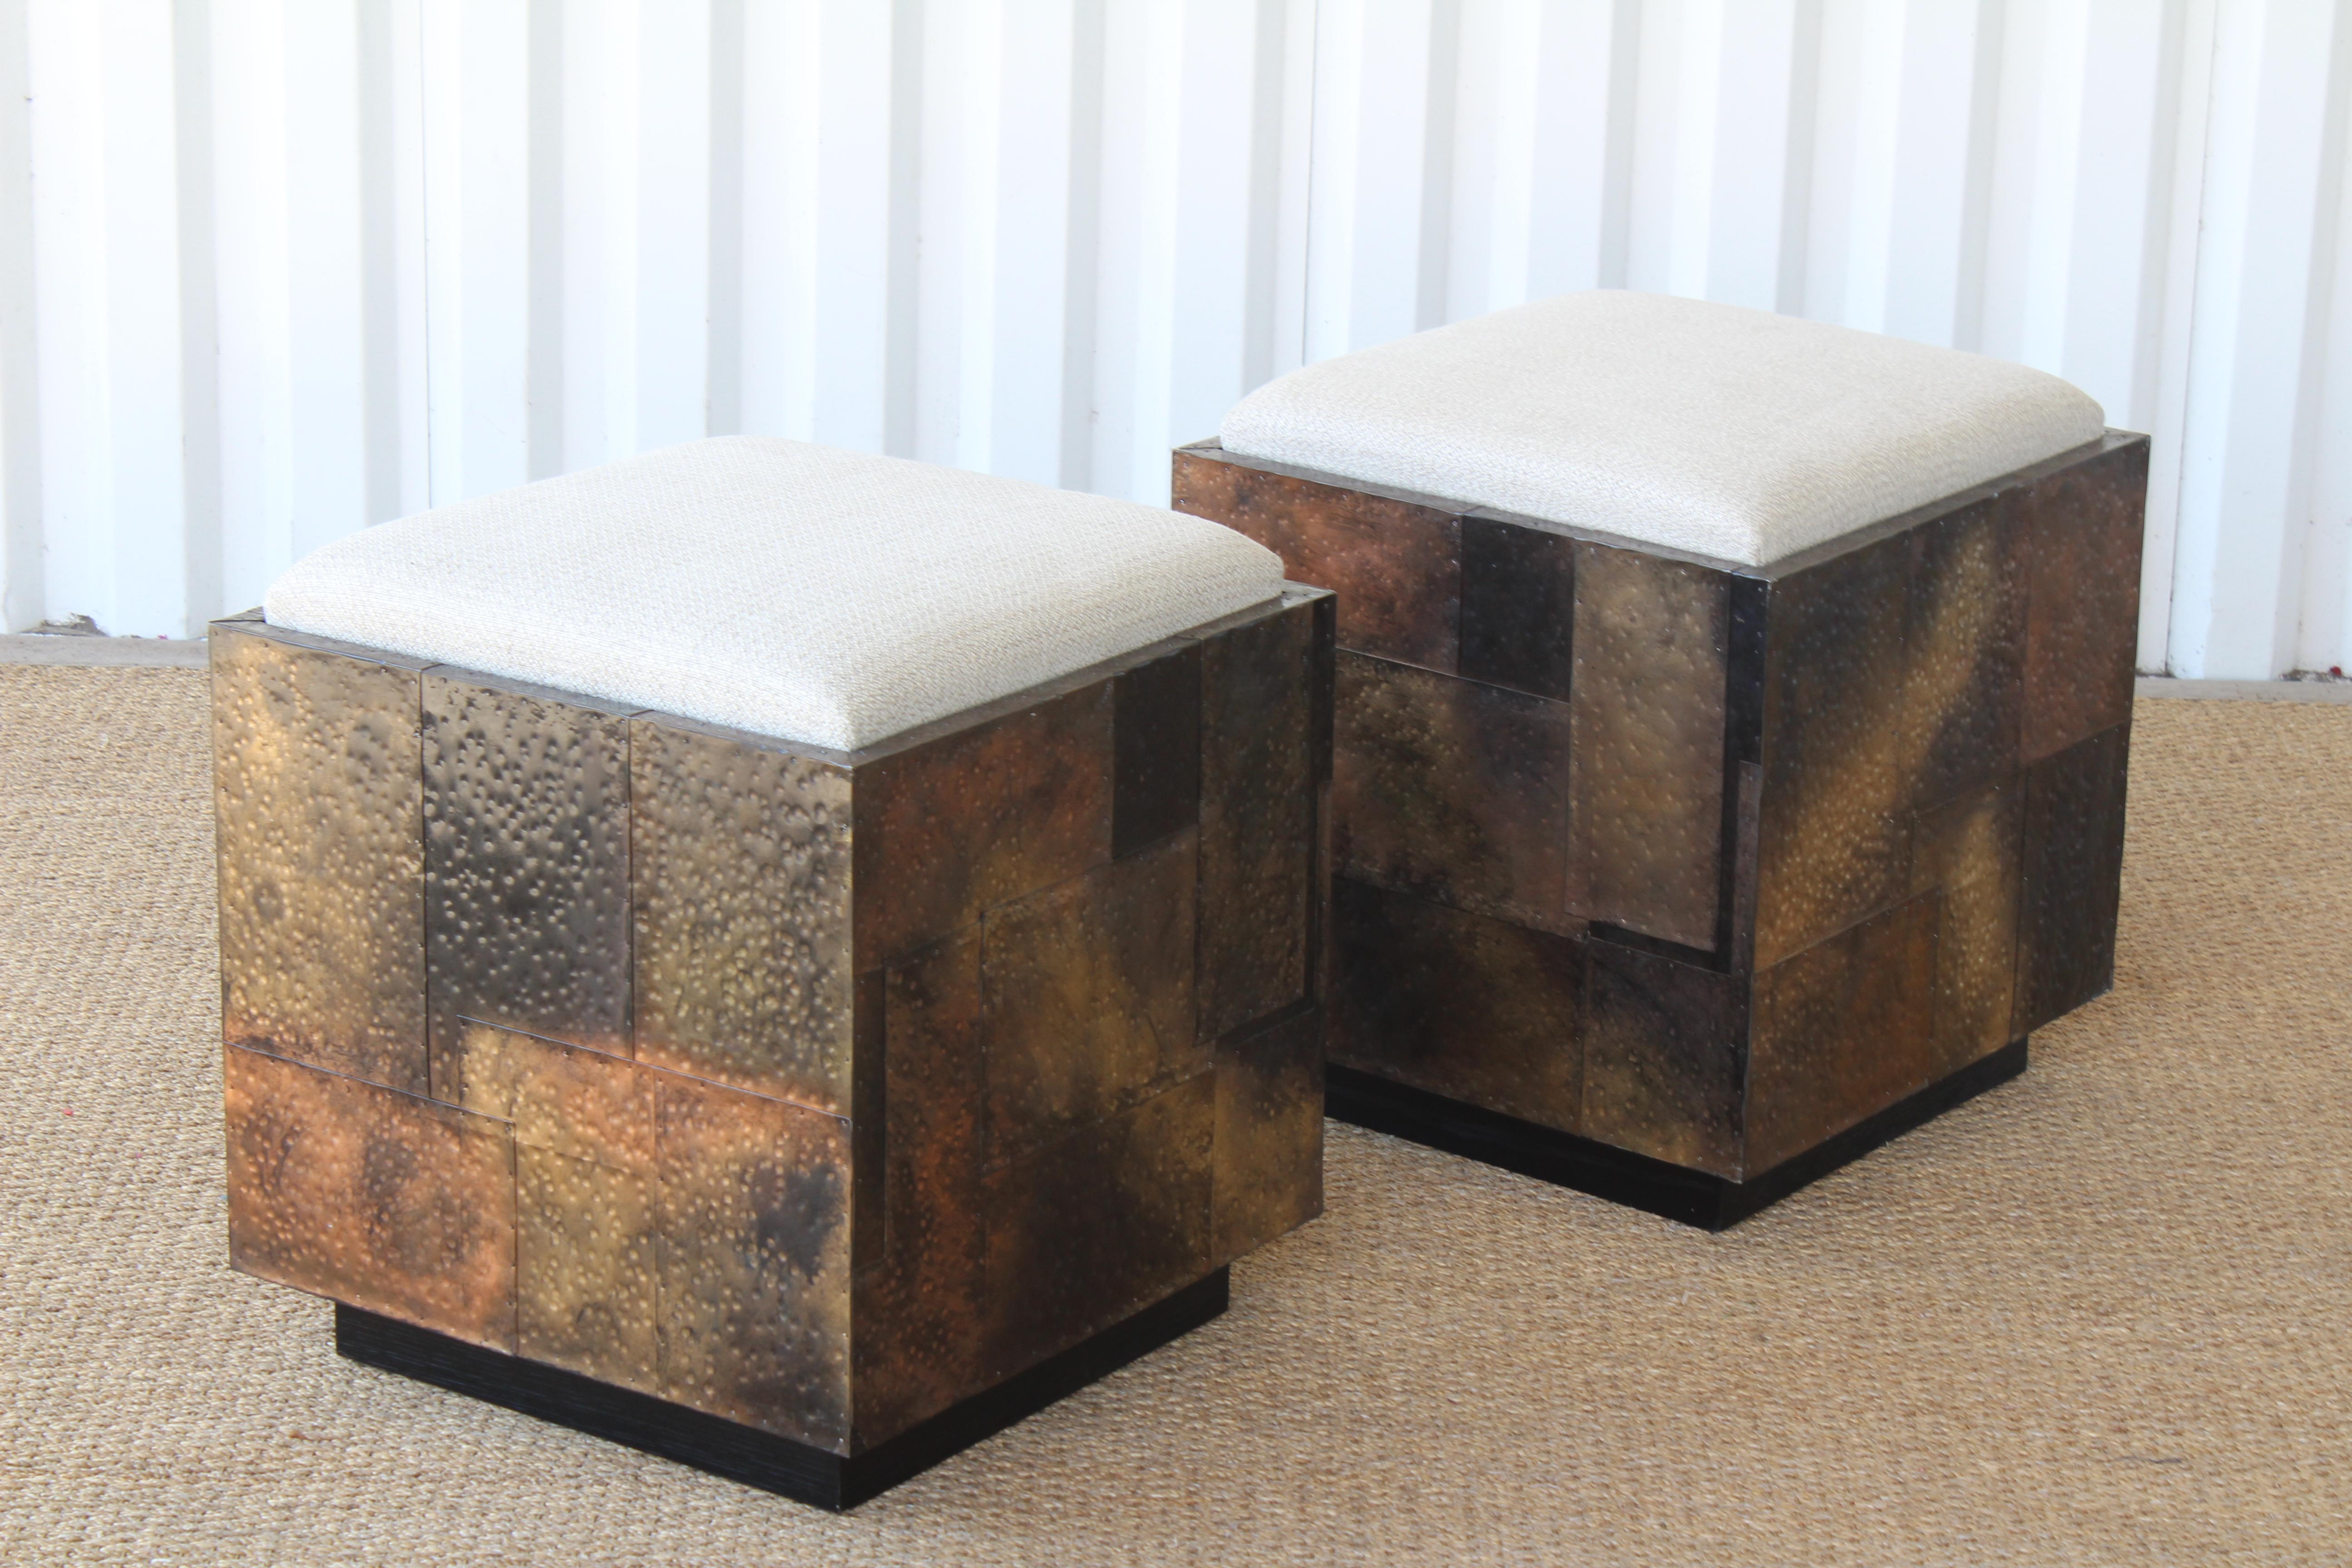 Pair of copper-clad stools or ottomans in the style of Paul Evans. Each stool rolls on casters and features removable seats for additional hidden storage. Seats are upholstered in a neutral linen. Sit on walnut plinth bases with new black finish. In